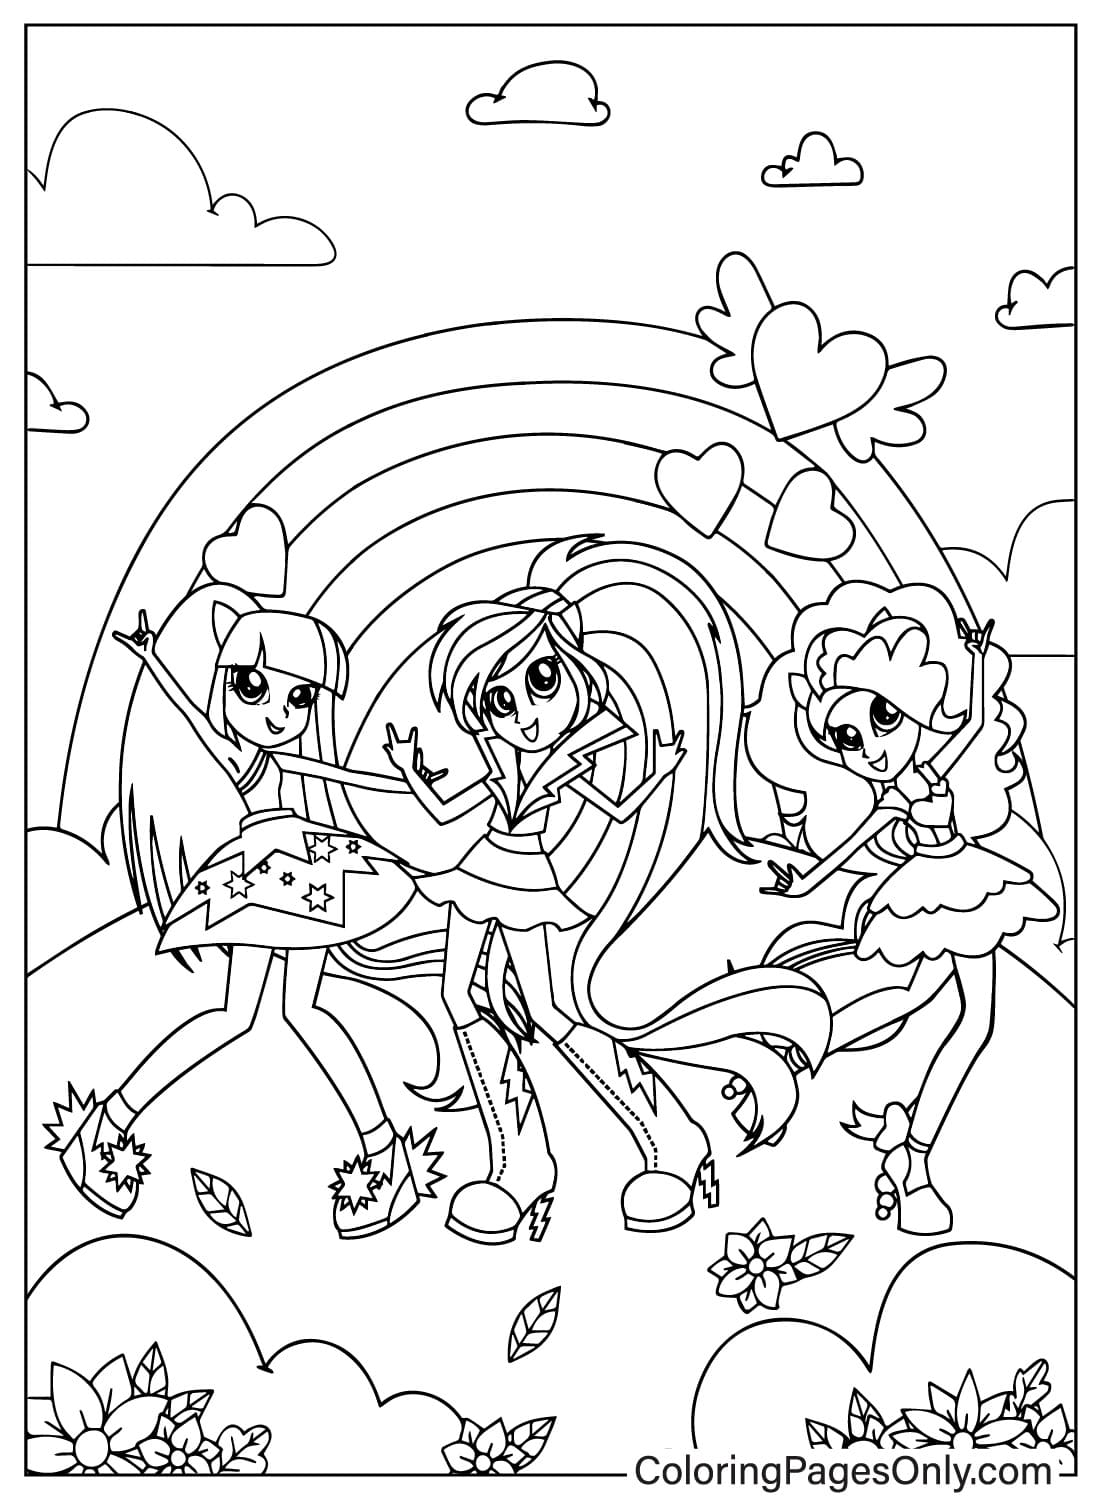 Equestria Girls Coloring Page Free